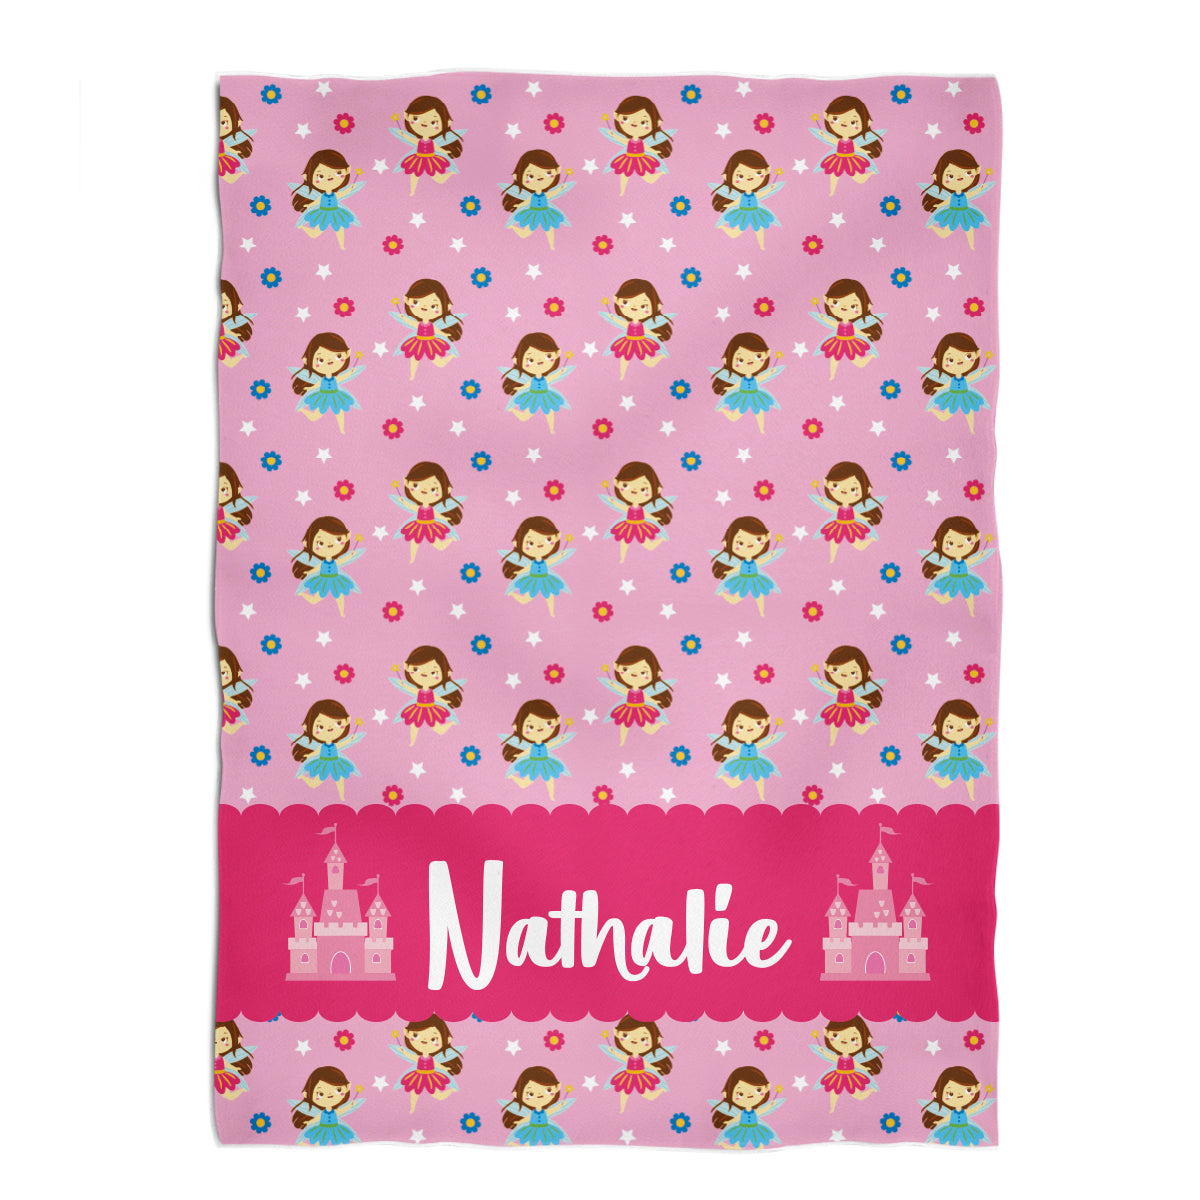 Fairy Princess Flowers Personalized Name Pink Fleece Blanket 40 x 58""